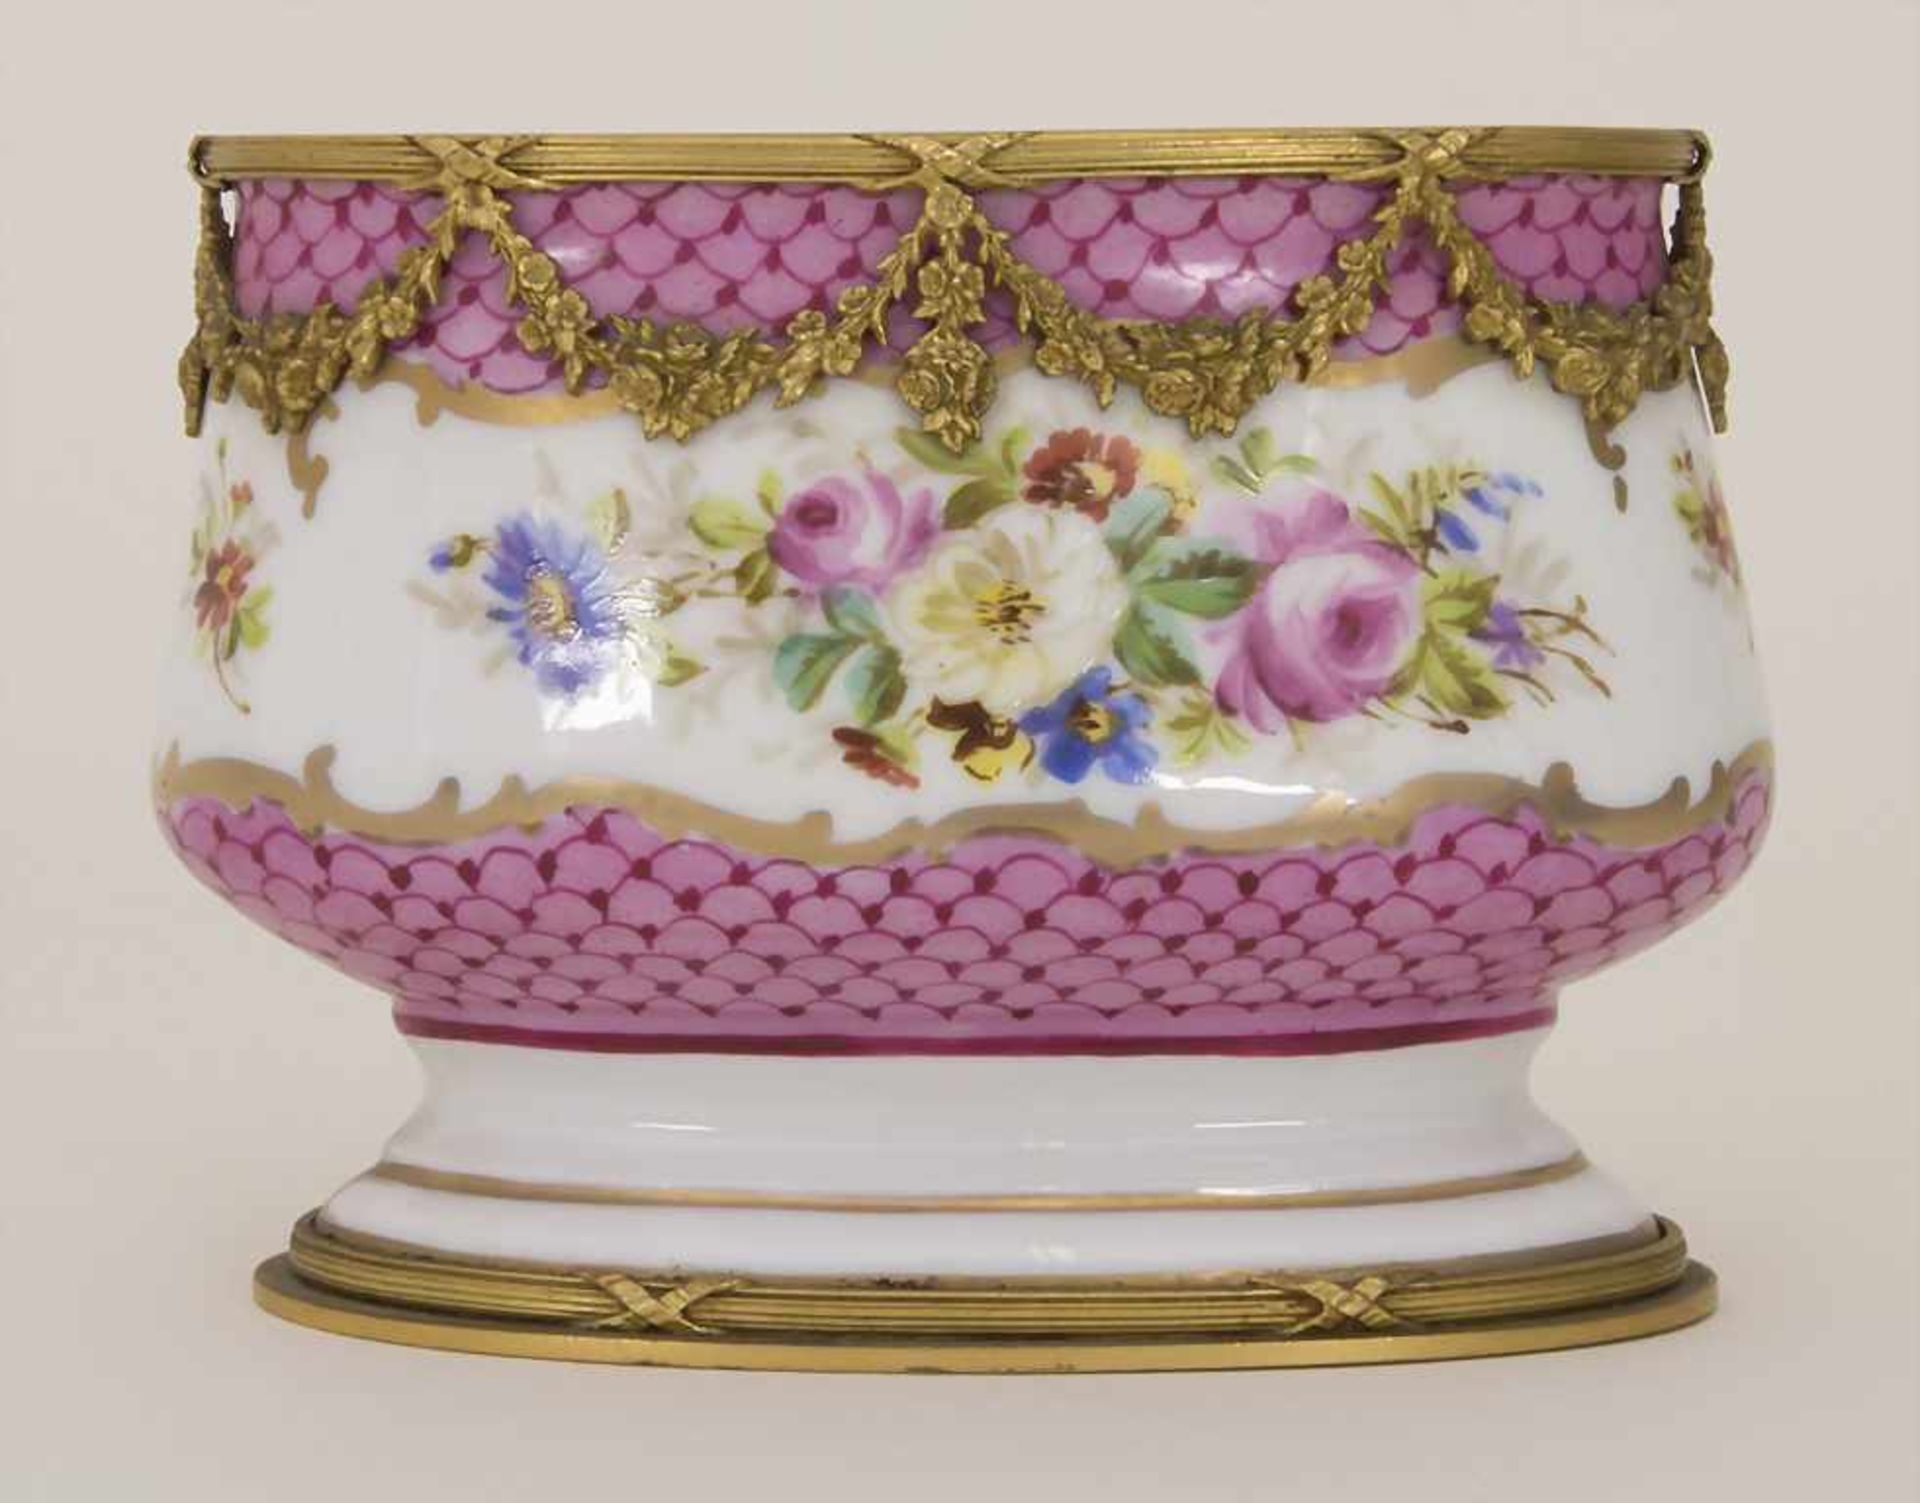 Ovale Vase mit Blumenbouquets / An oval vase with flowers, Ende 19. Jh.Material: Porzellan,